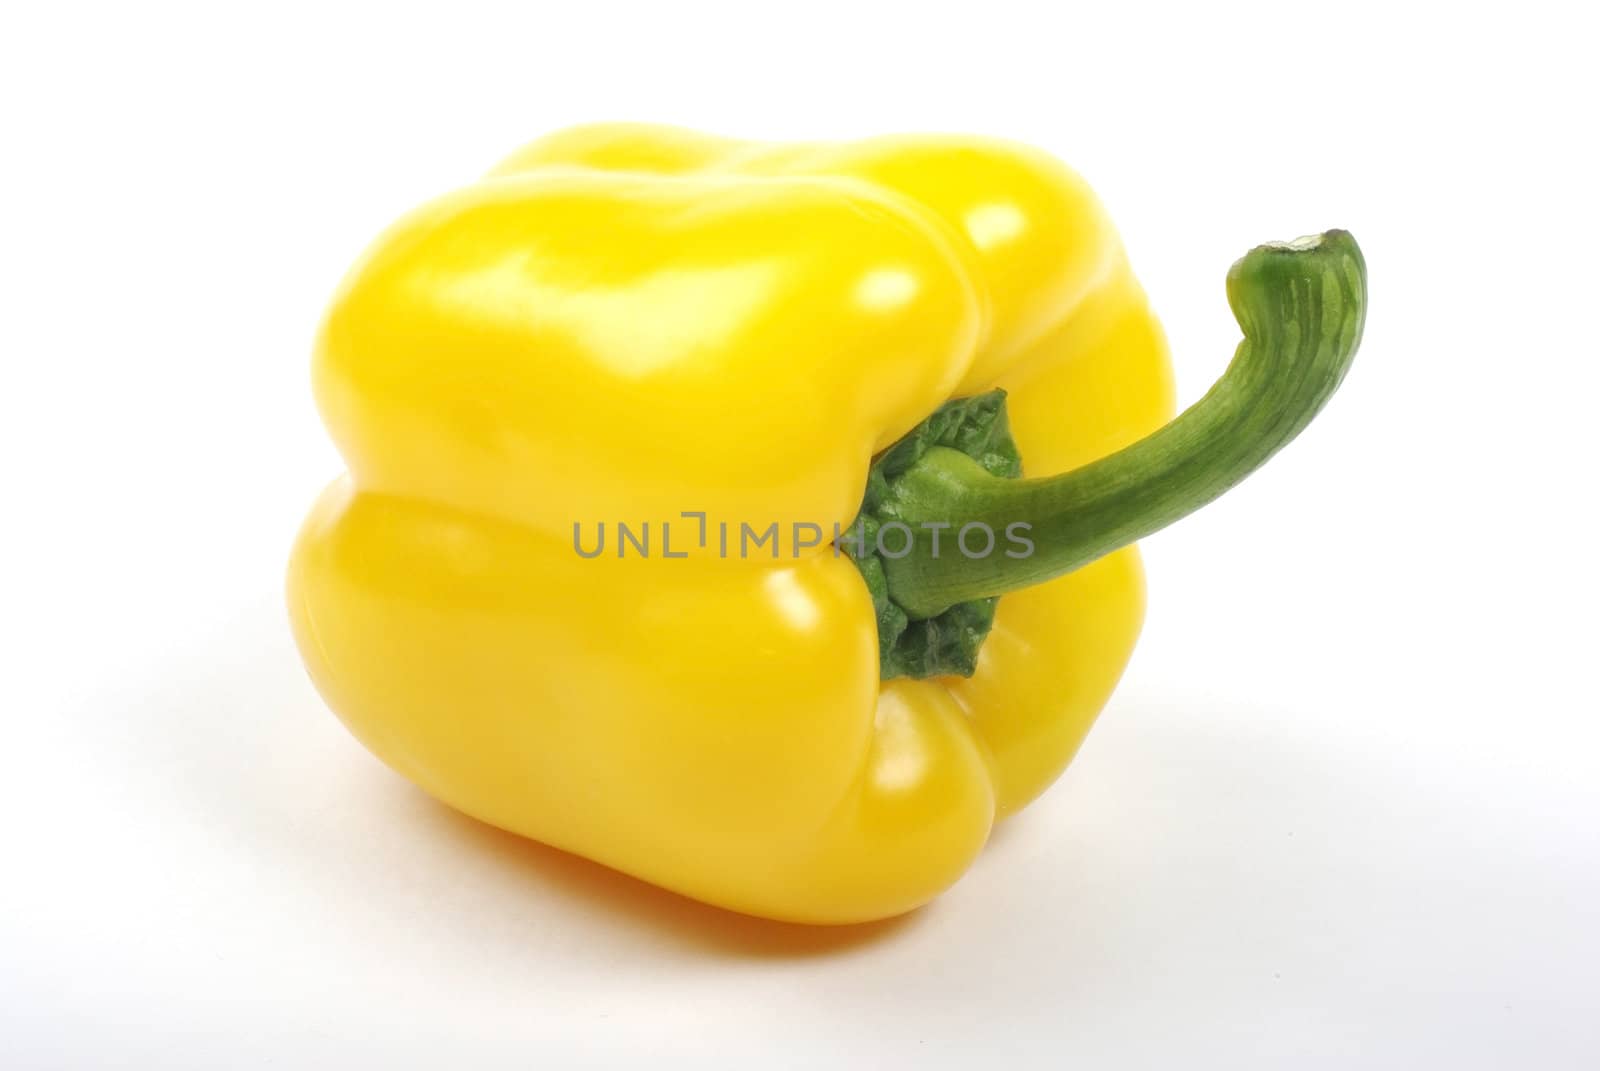 Yellow bell pepper isolated on white background with shadow.